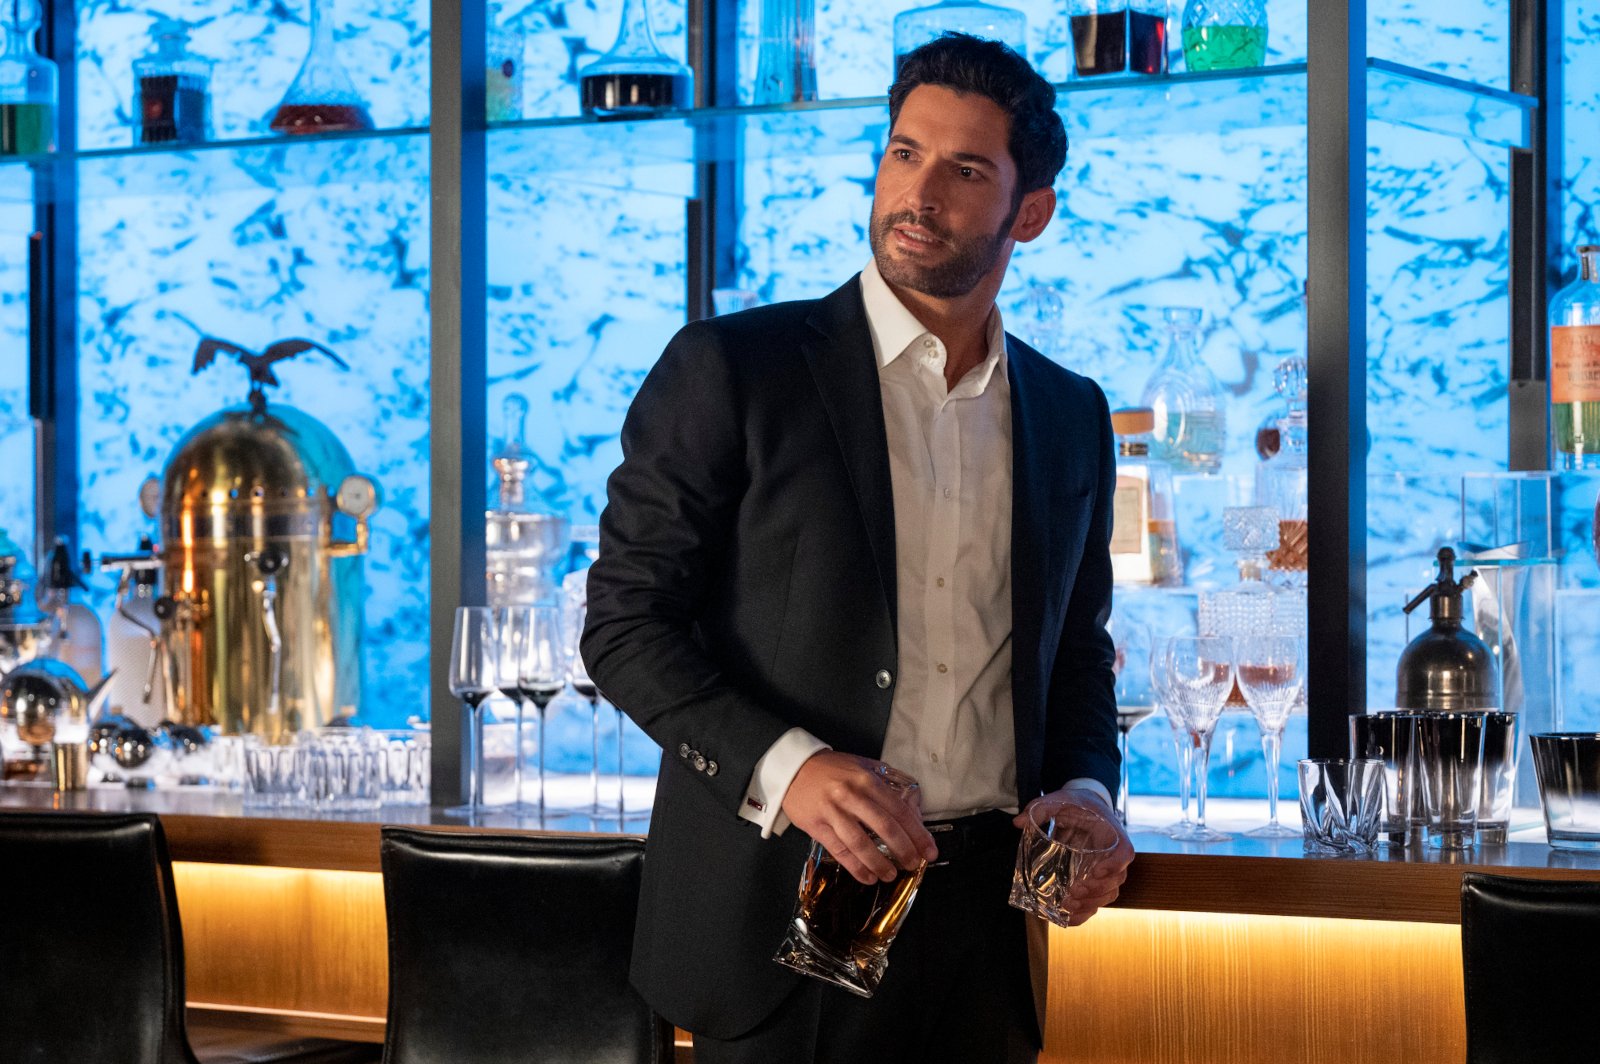 Tom Ellis as Lucifer Morningstar in 'Lucifer' Season 6. He's wearing a suit and standing in front of a bar. He's holding a glass and a bottle. 'Lucifer' will not receive a season 7.